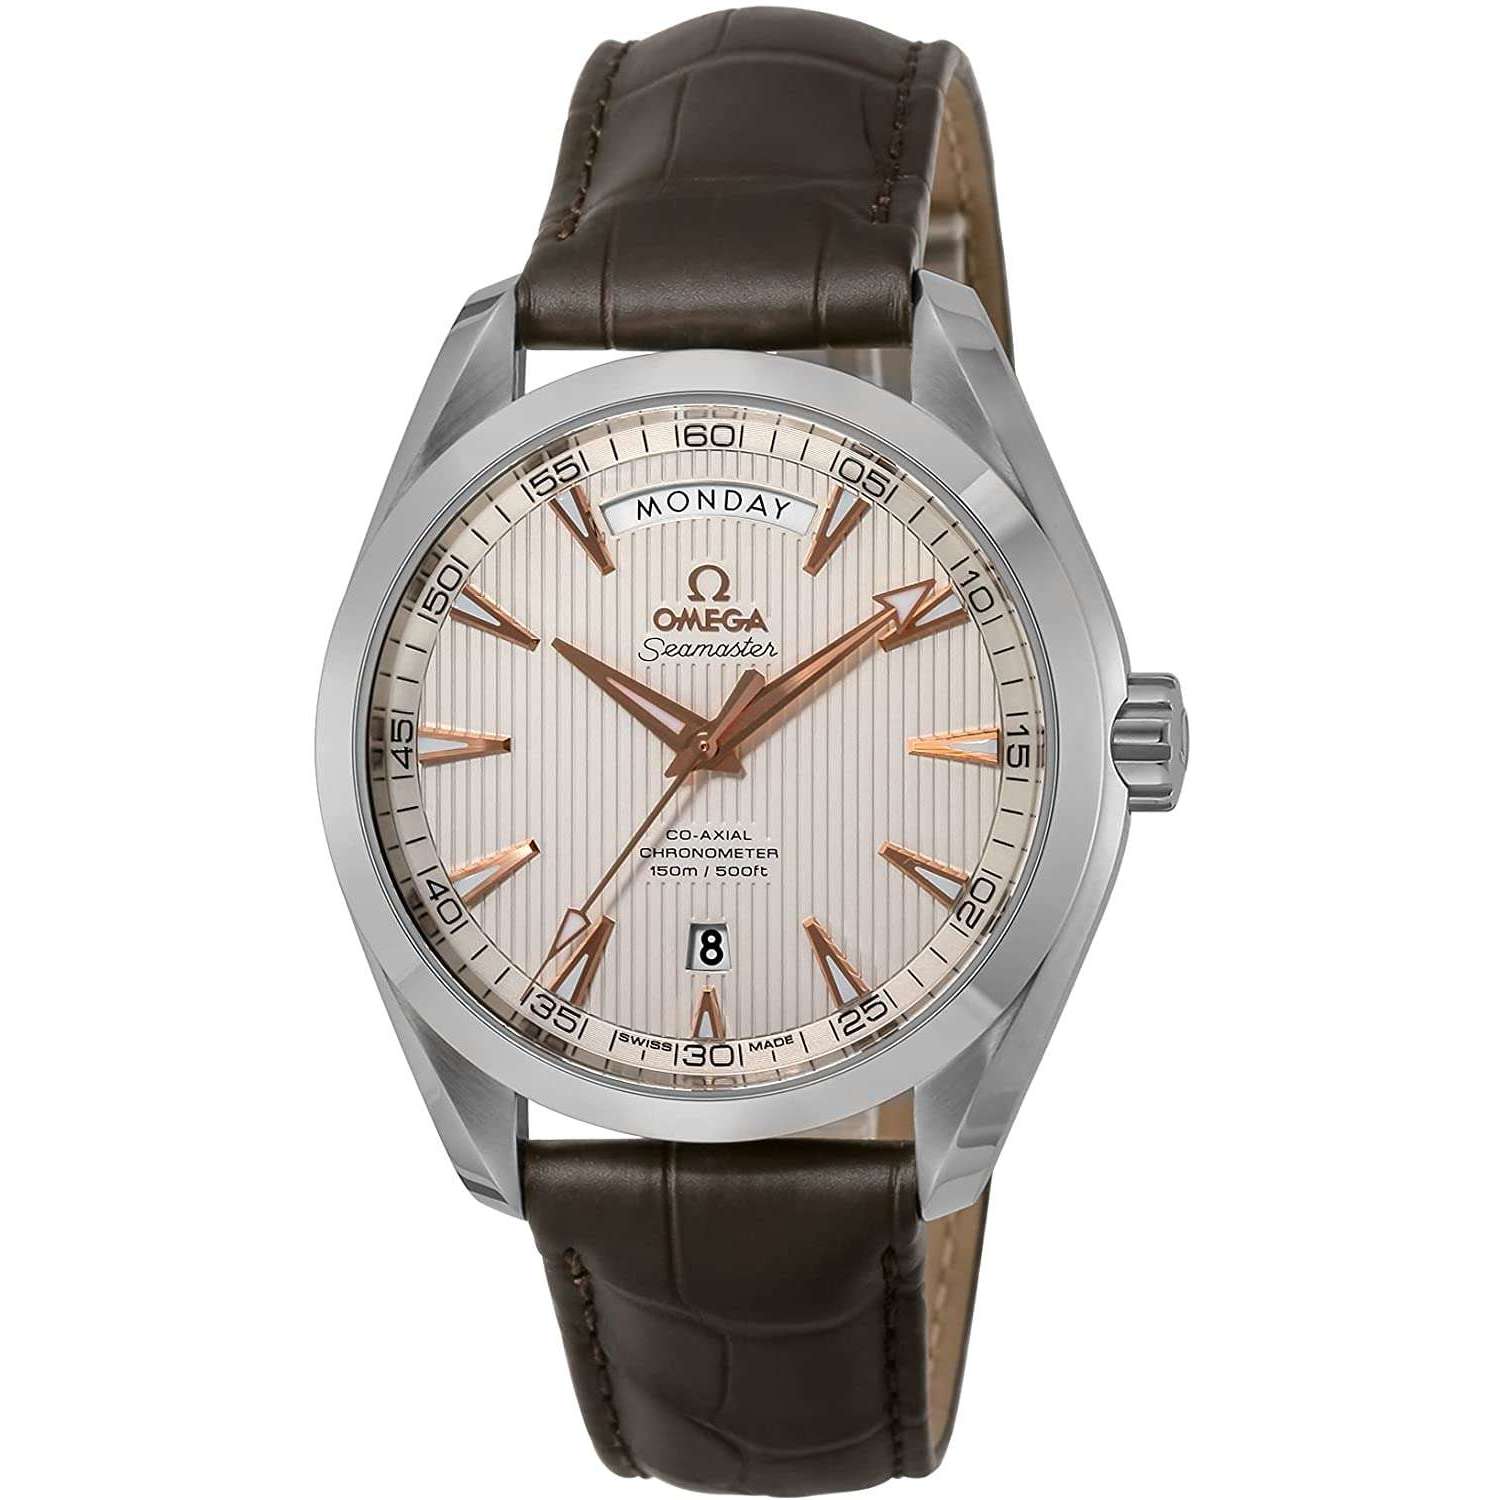 ROOK JAPAN:OMEGA SEAMASTER CO-AXIAL CHRONOMETER 42 MM MEN WATCH 231.13.42.22.02.001,Luxury Watch,Omega